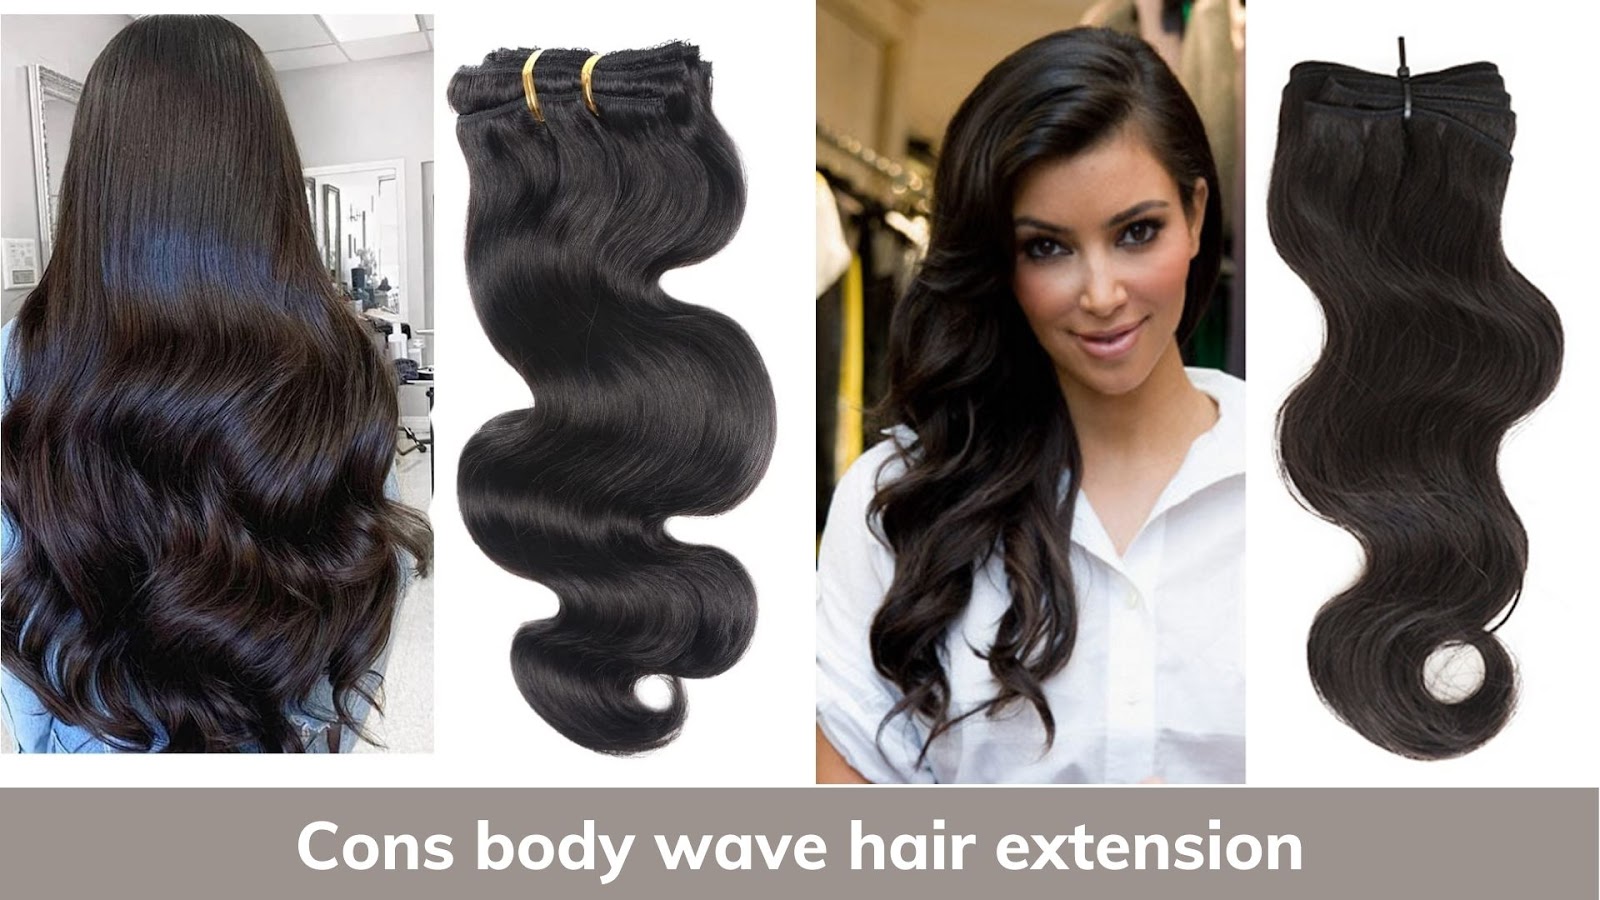 Cons of body wave hair extensions